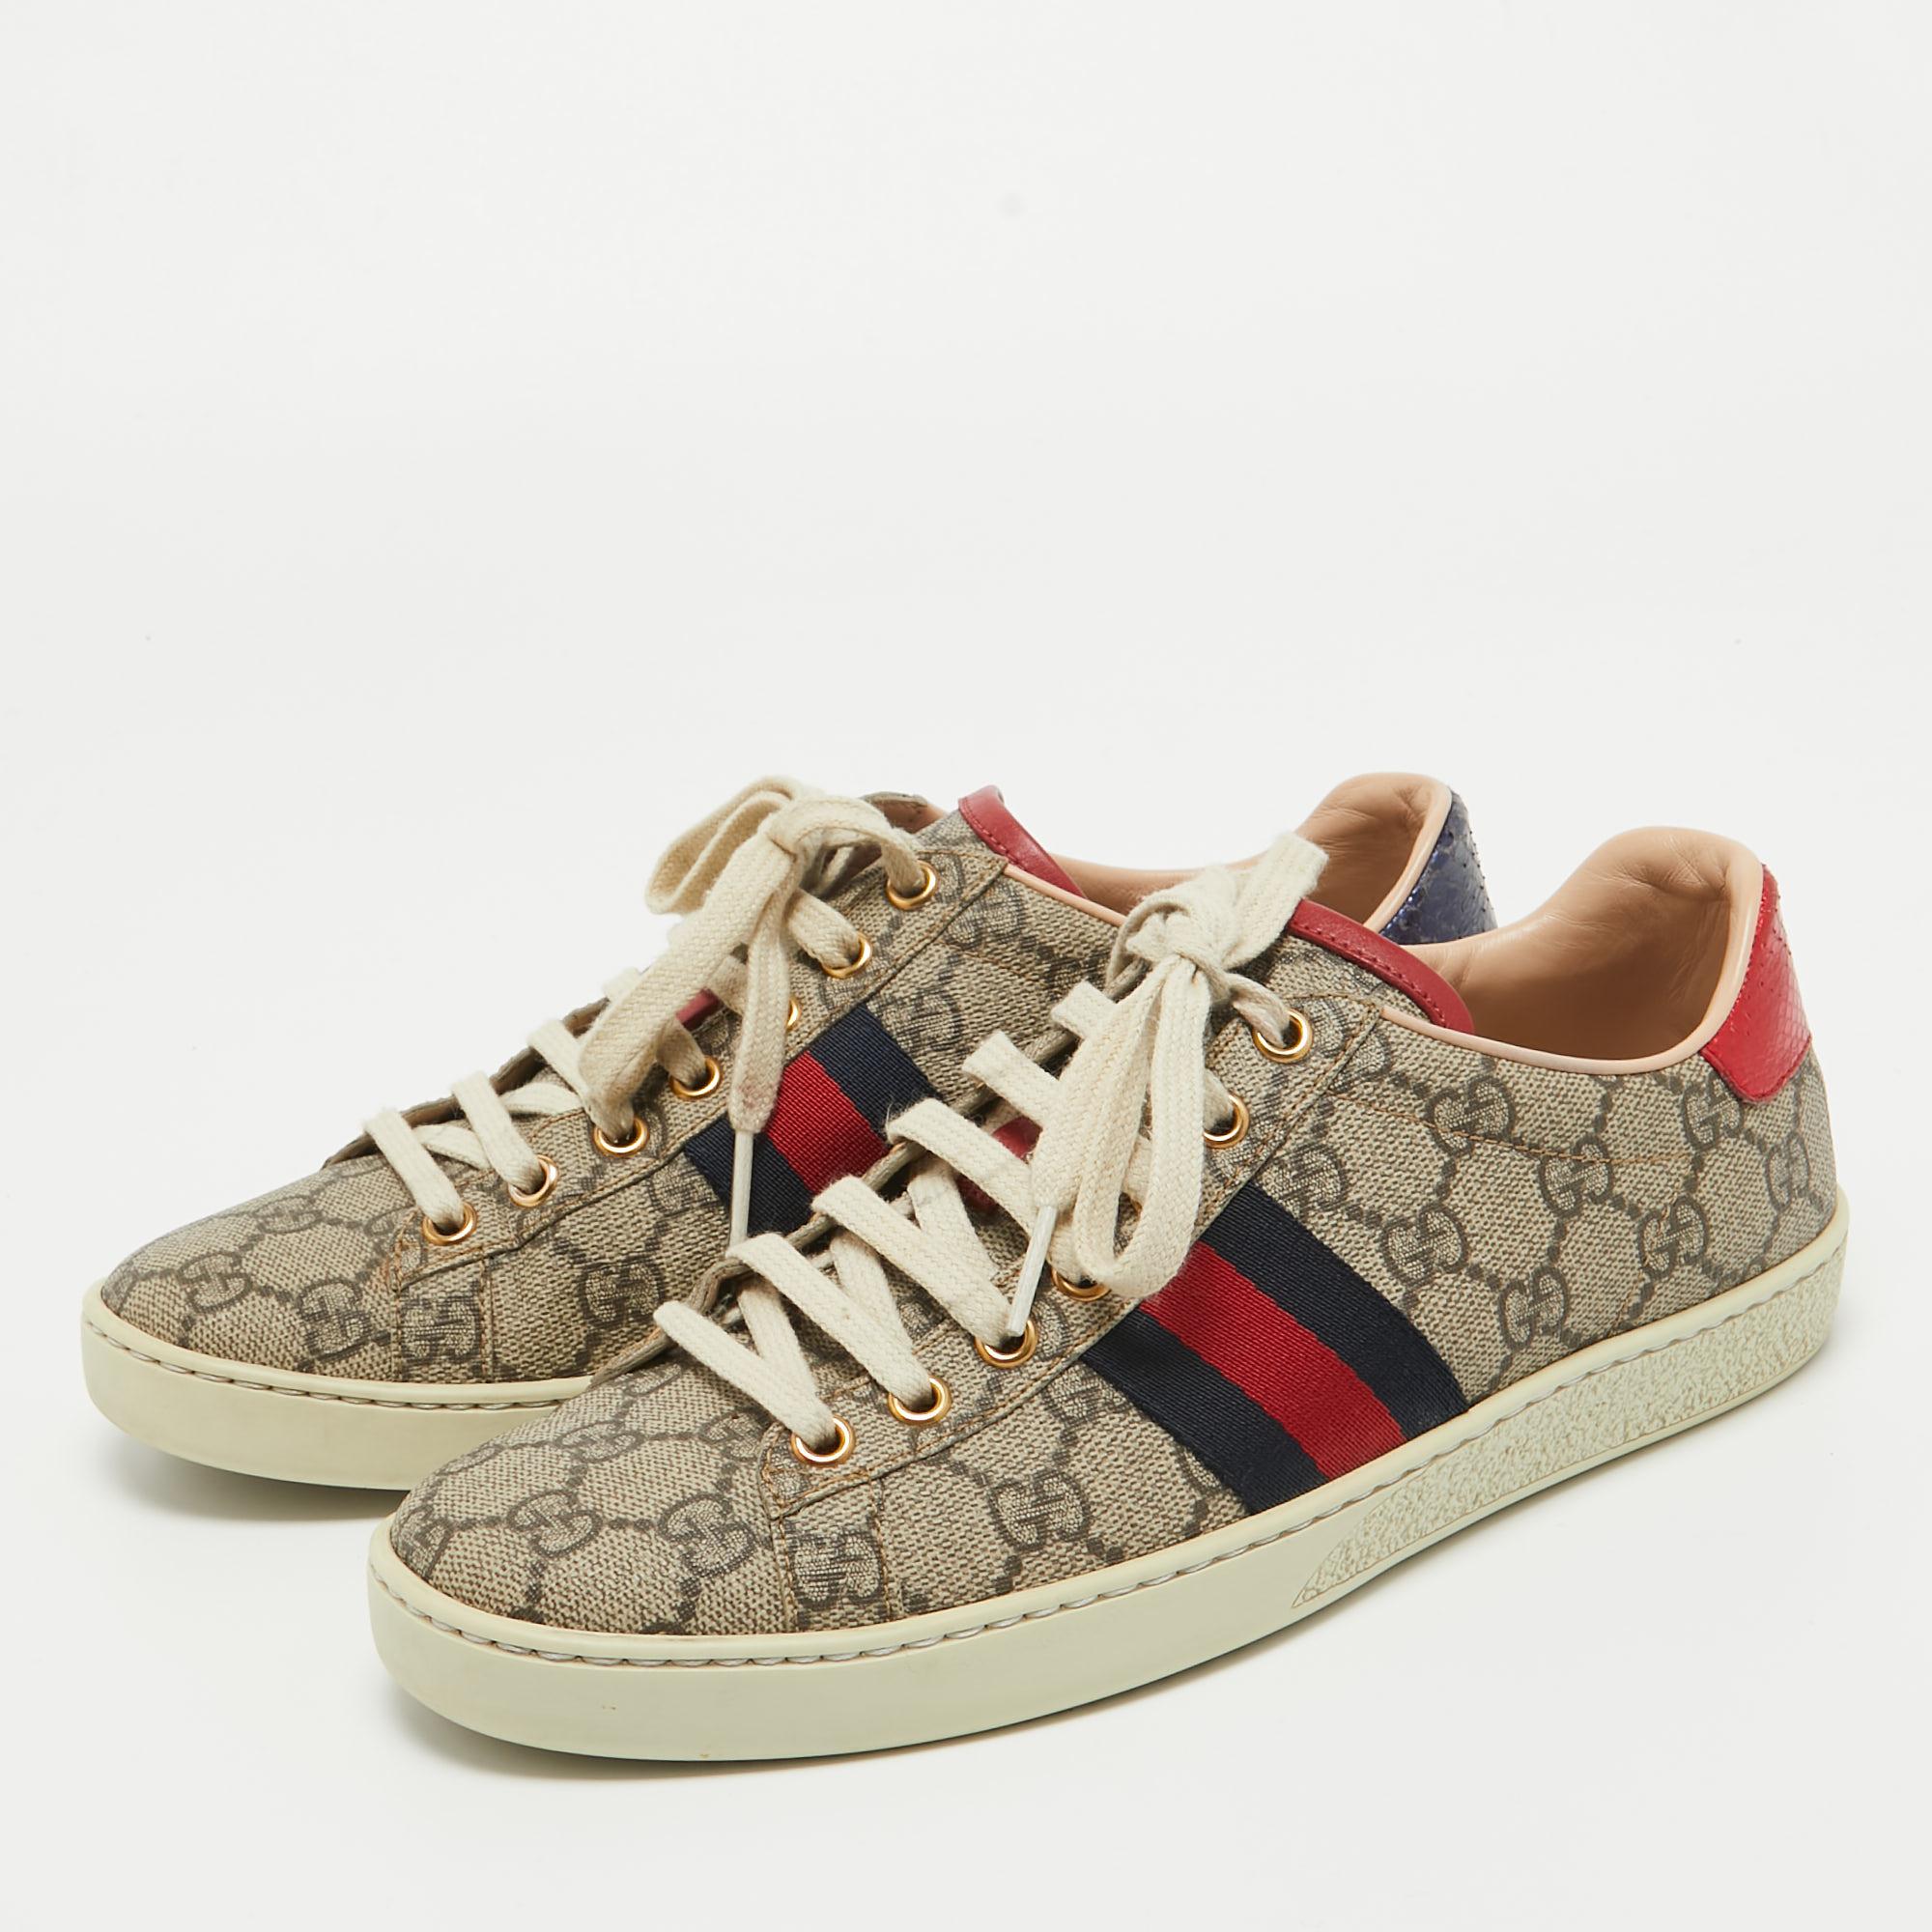 Gucci Brown/Beige Monogram Canvas Ace Low Top Sneakers Size 37.5 1